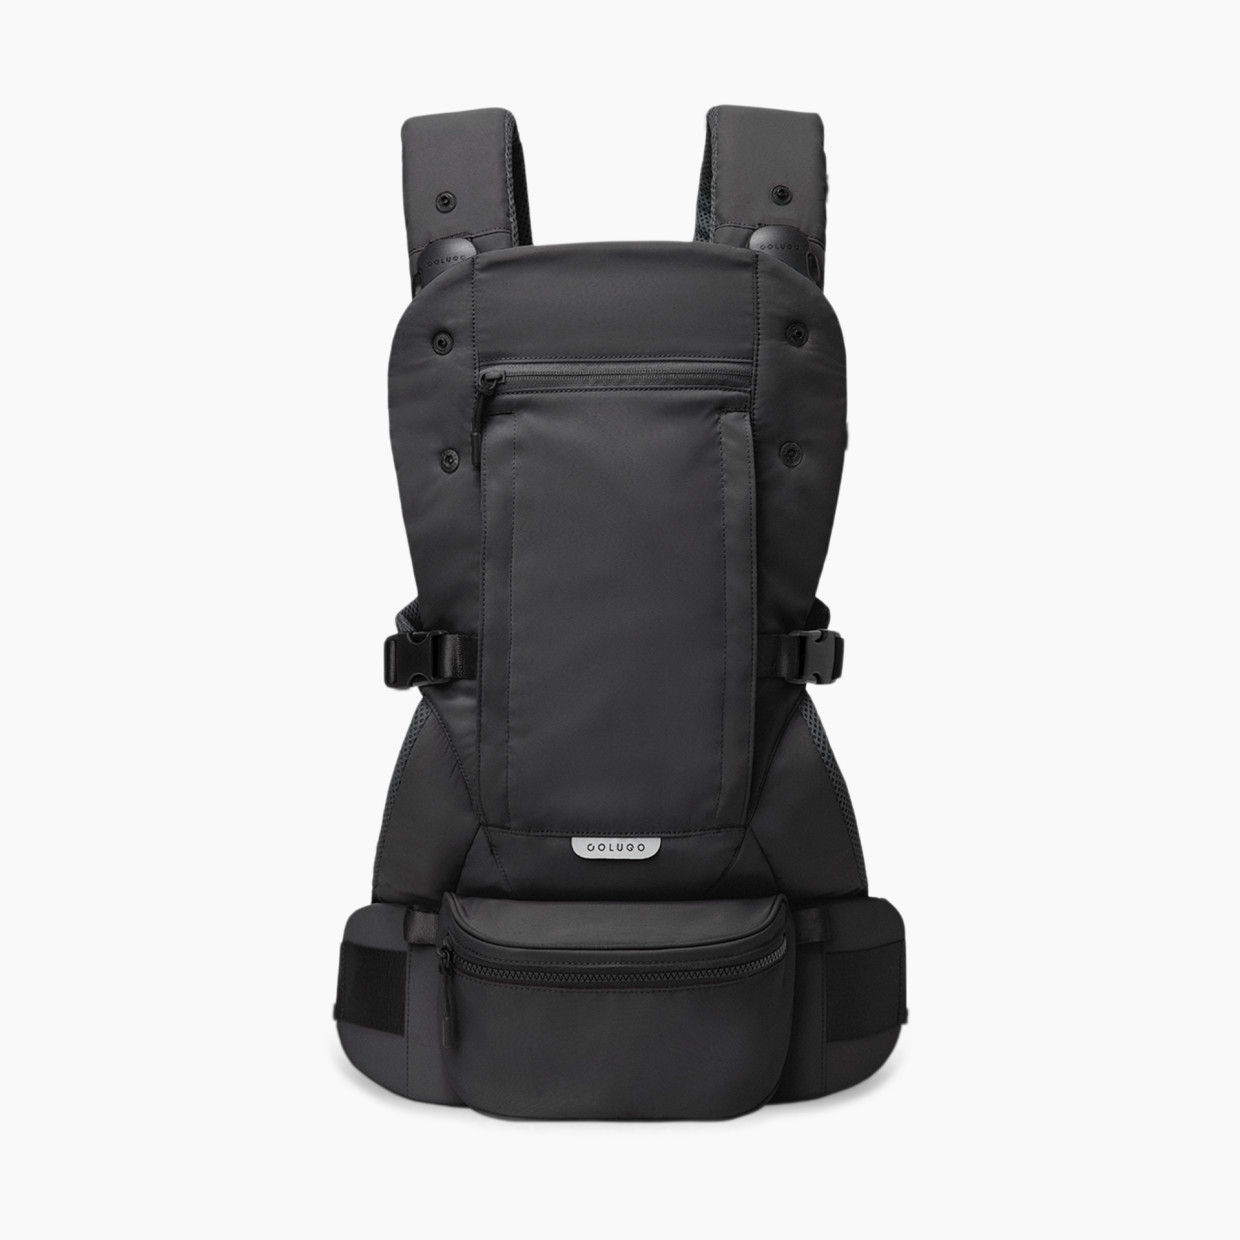 Colugo The Baby Carrier - Black.